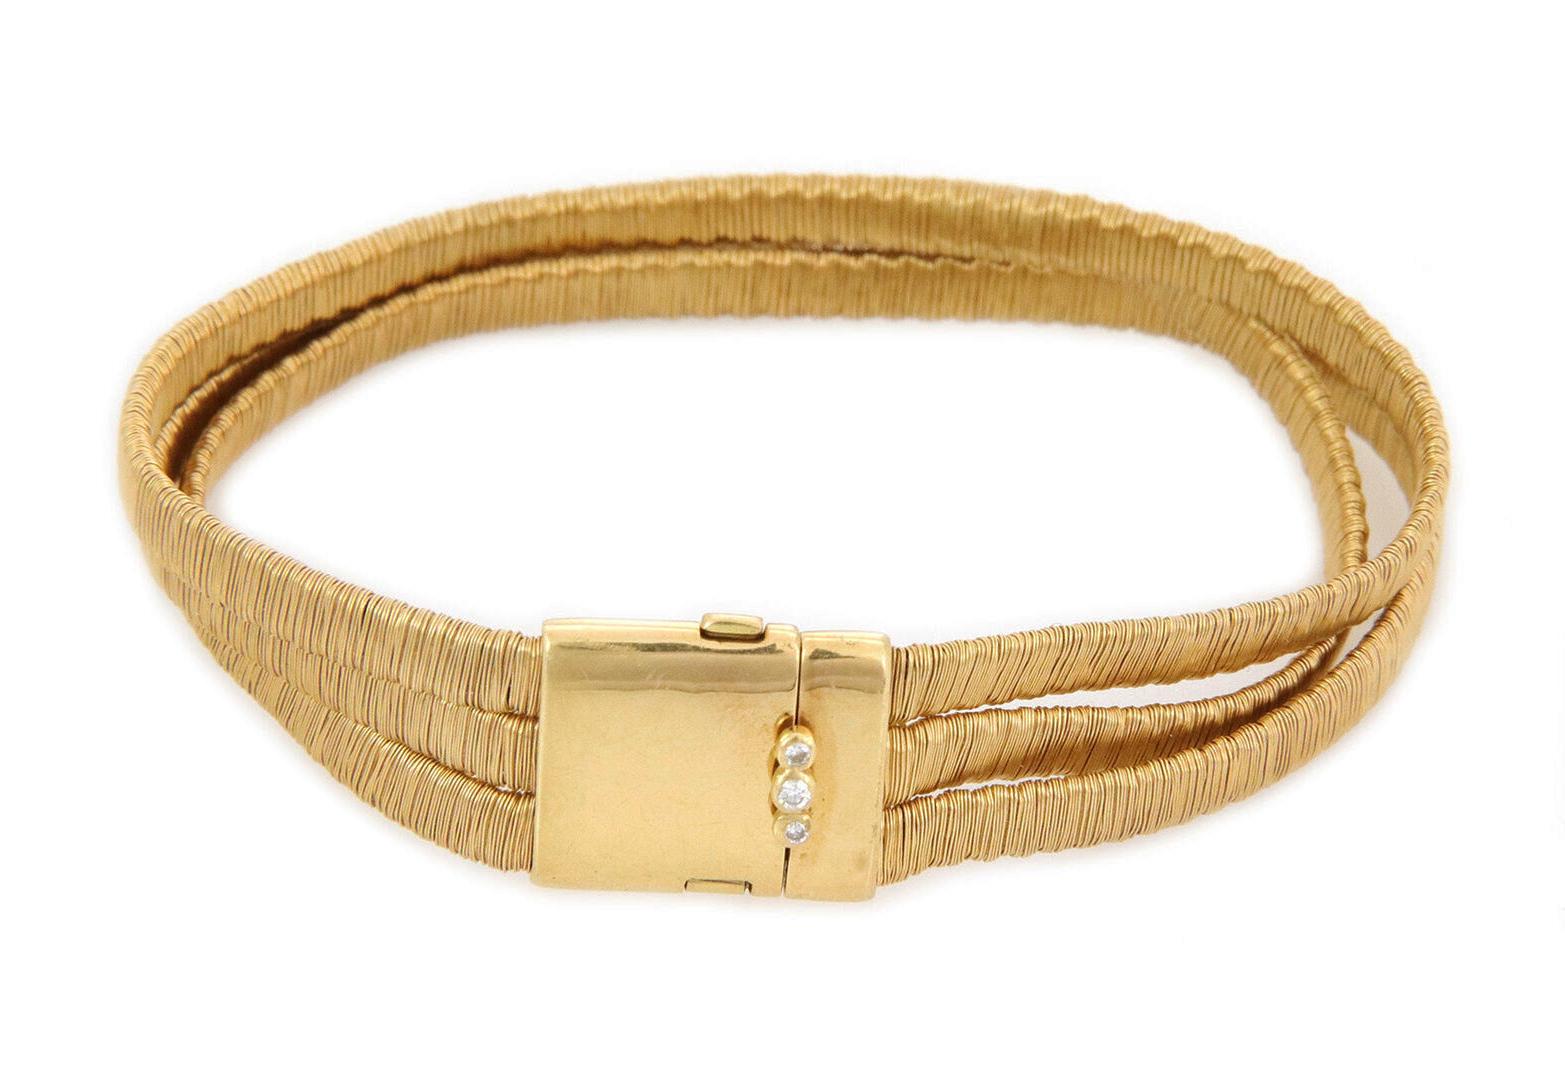 This is an elegant authentic bracelet by H.Stern, crafted from 18k yellow gold featuring silk wrap triple strand flex band attached to the slide bar clasp. Each strand is 4mm wide and the bracelet secure with a slide clasp. It has Stern's star